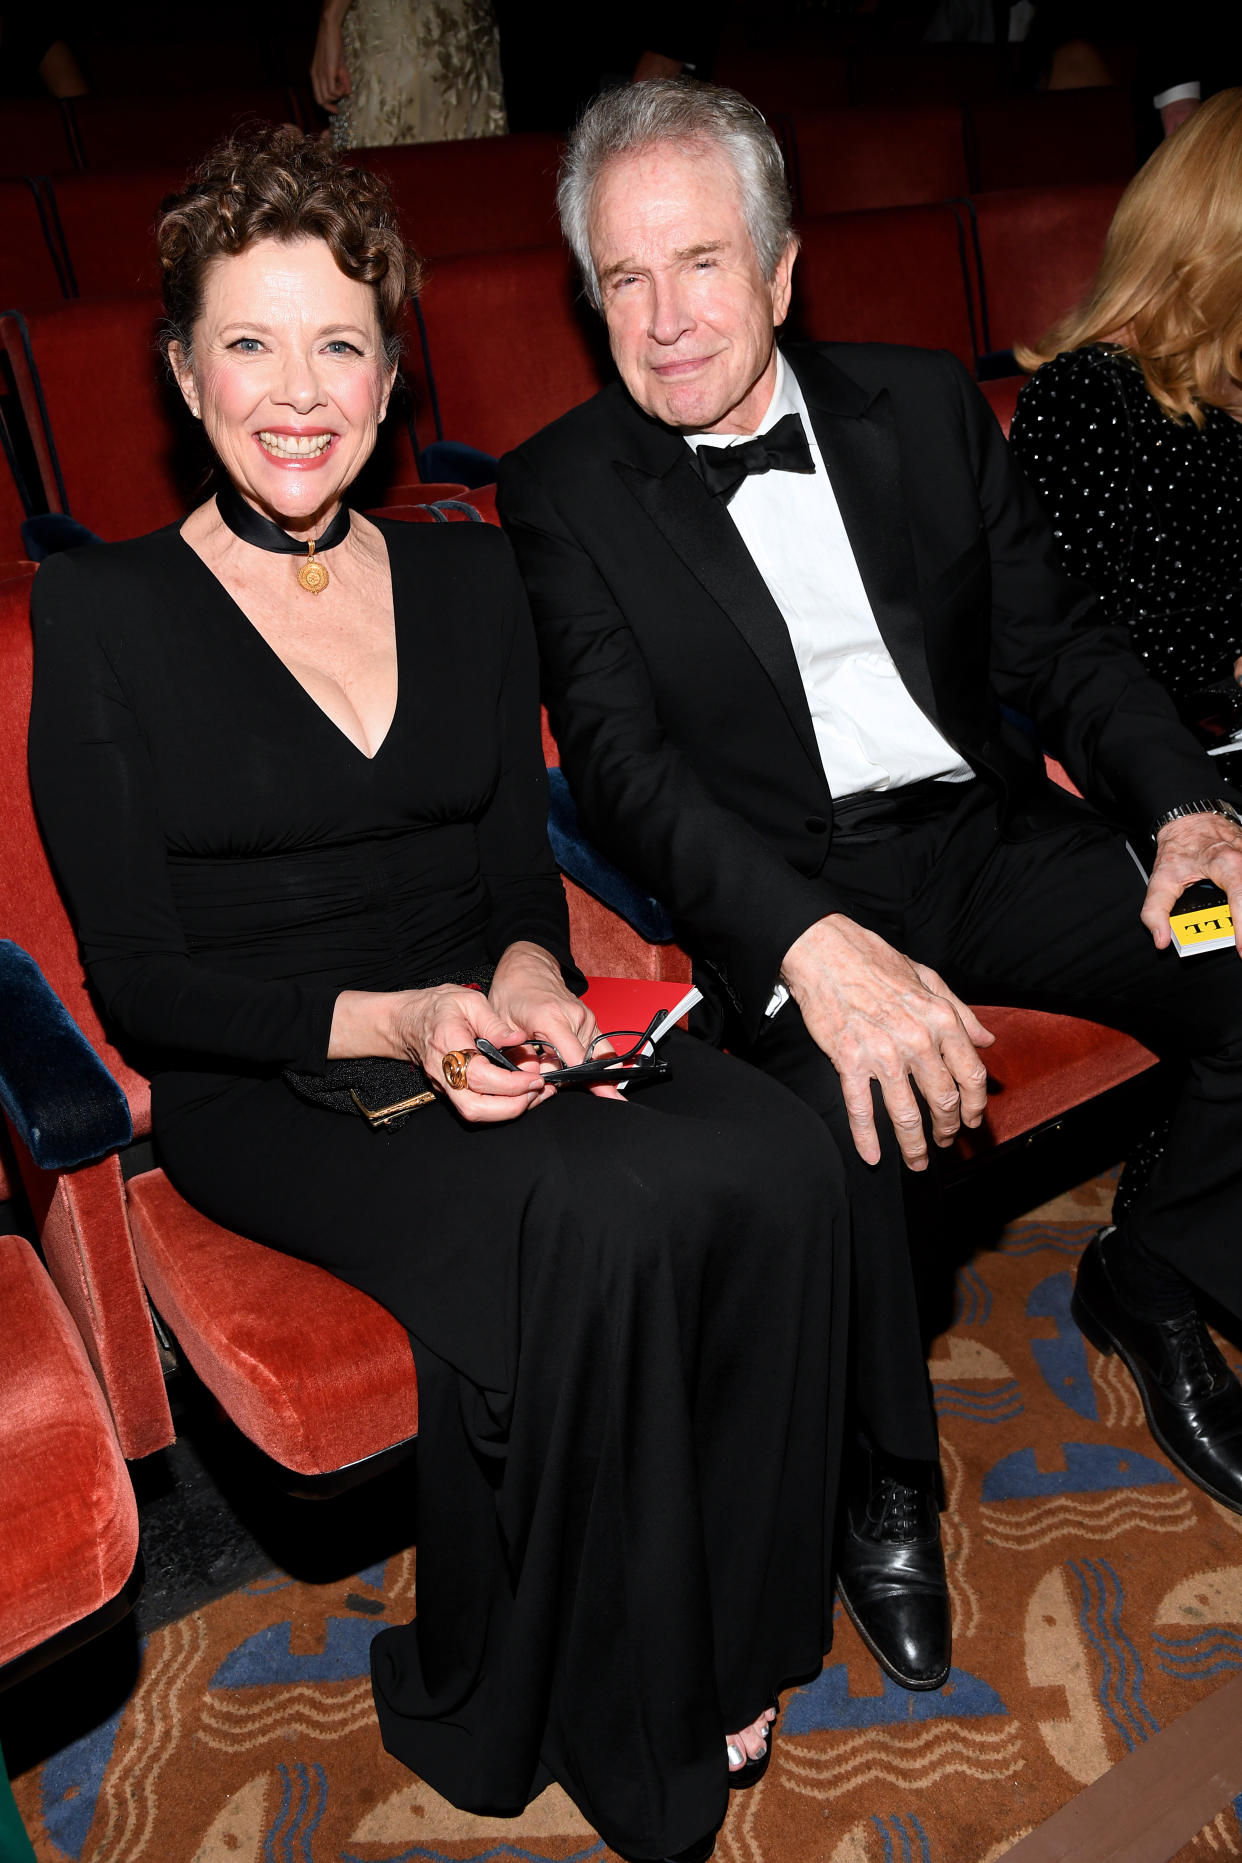 NEW YORK, NEW YORK - JUNE 09: Annette Bening and Warren Beatty  attend the 73rd Annual Tony Awards at Radio City Music Hall on June 09, 2019 in New York City. (Photo by Kevin Mazur/Getty Images for Tony Awards Productions)